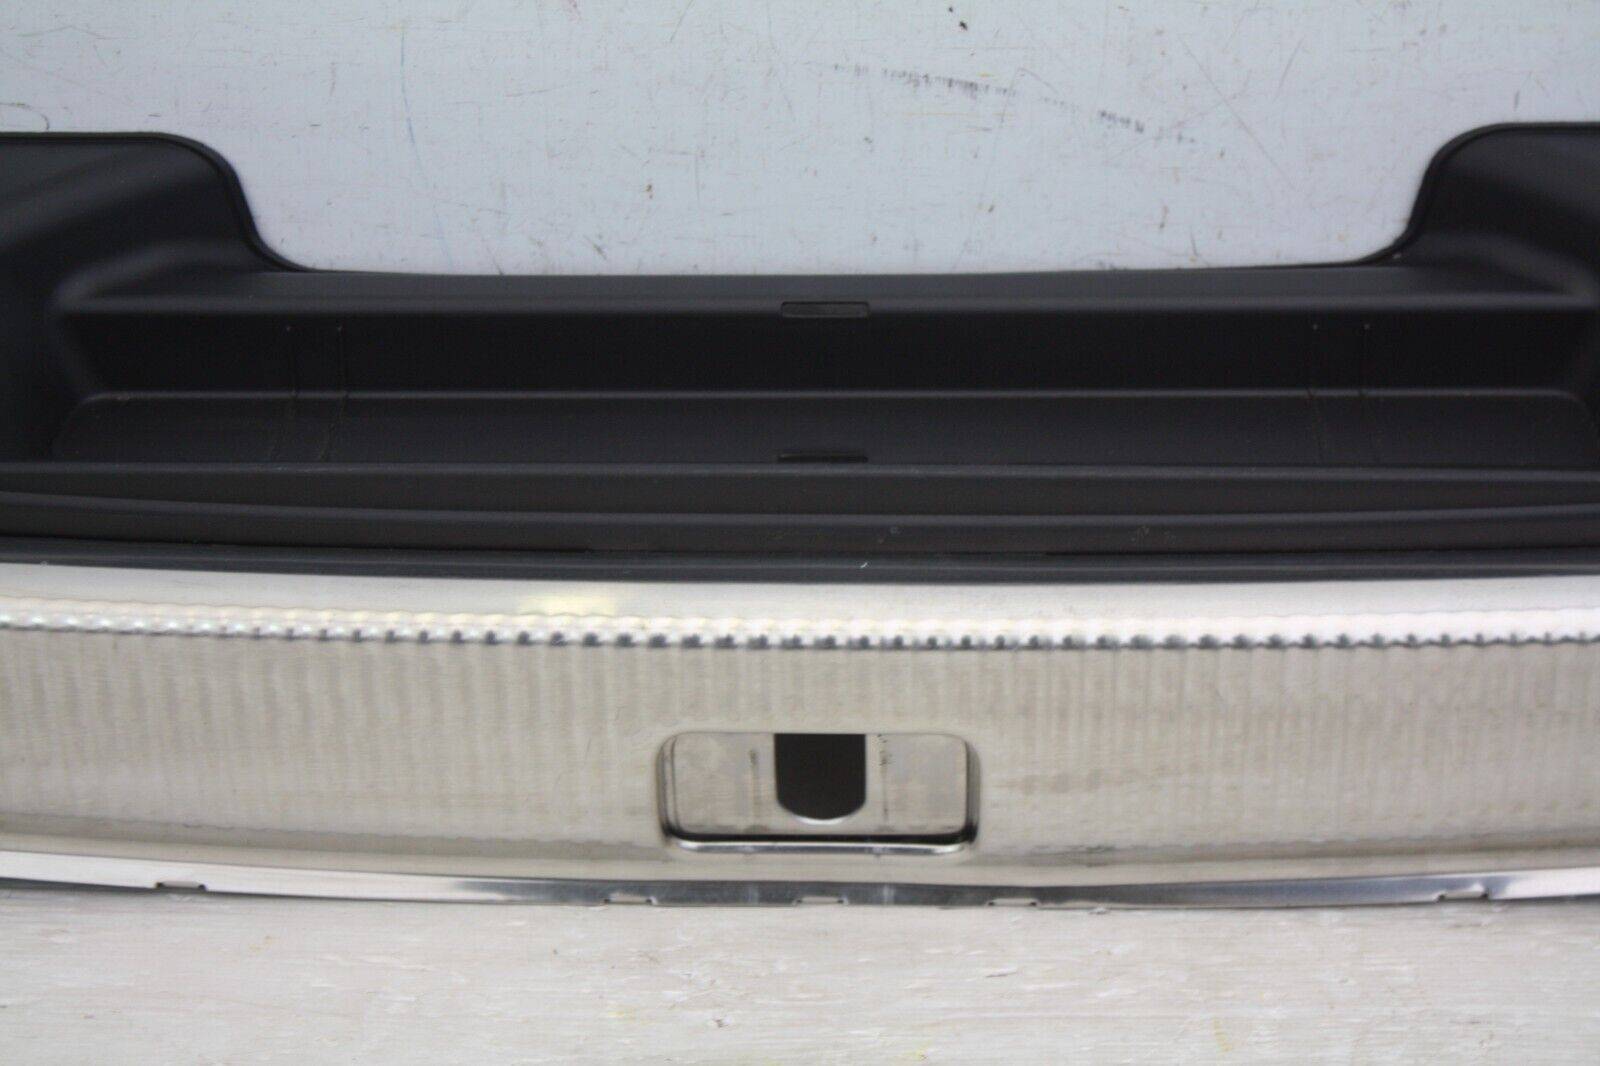 Audi-Q5-S-Line-Boot-Lid-Plate-Handle-2009-to-2017-8R0864513C-Genuine-175943458471-3